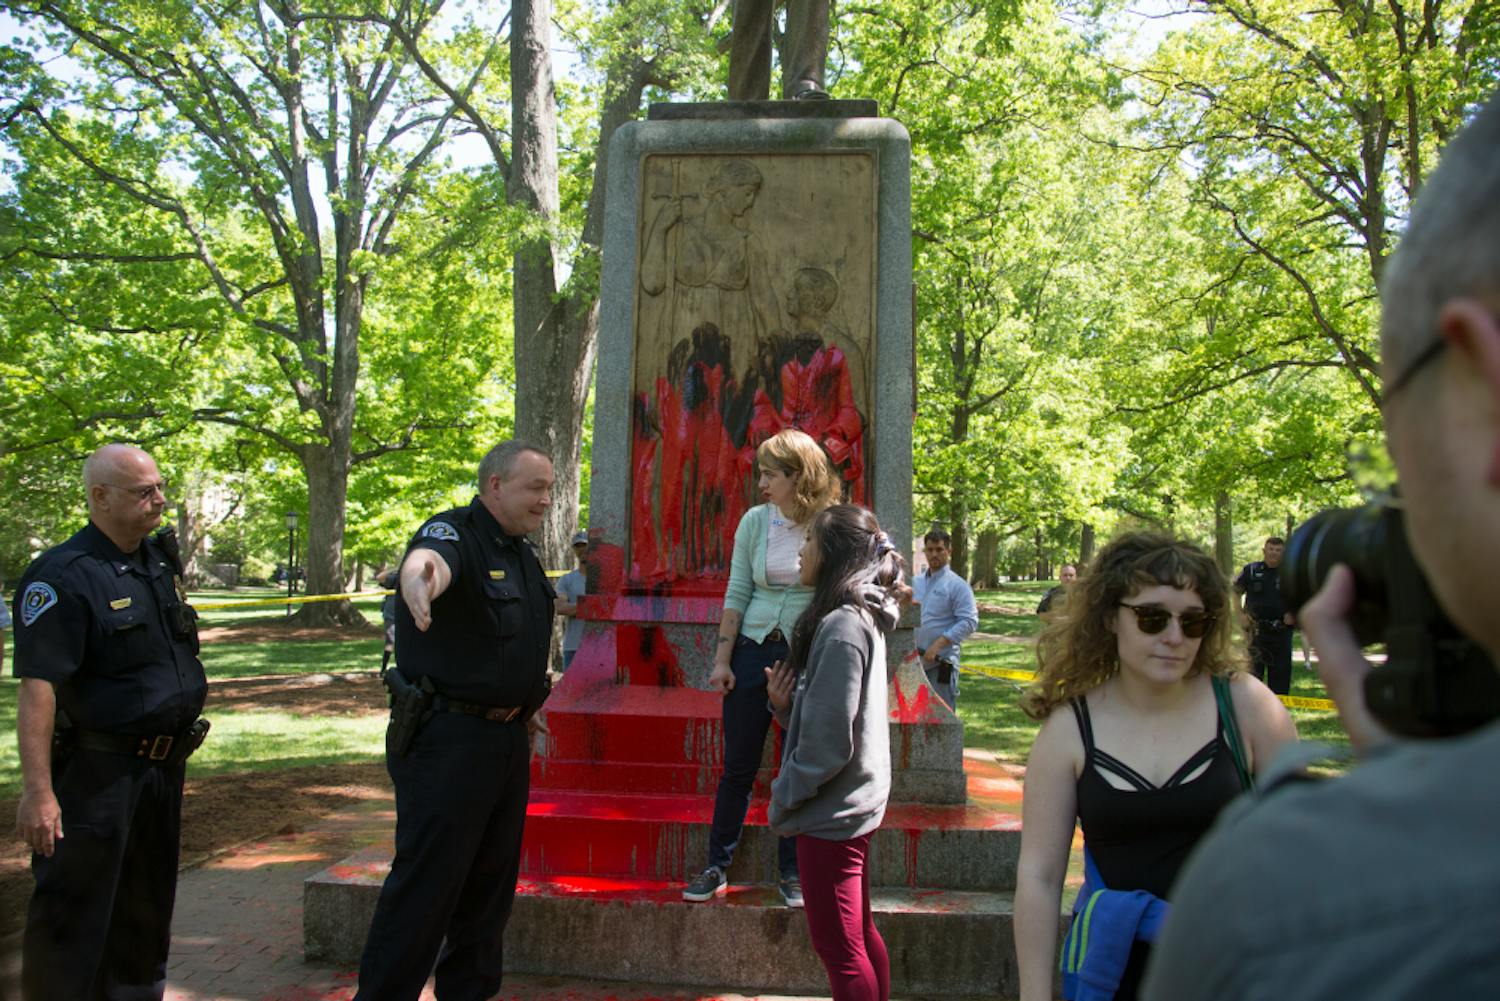 Silent Sam, a Confederate monument on campus, was defaced with red paint on Monday afternoon.